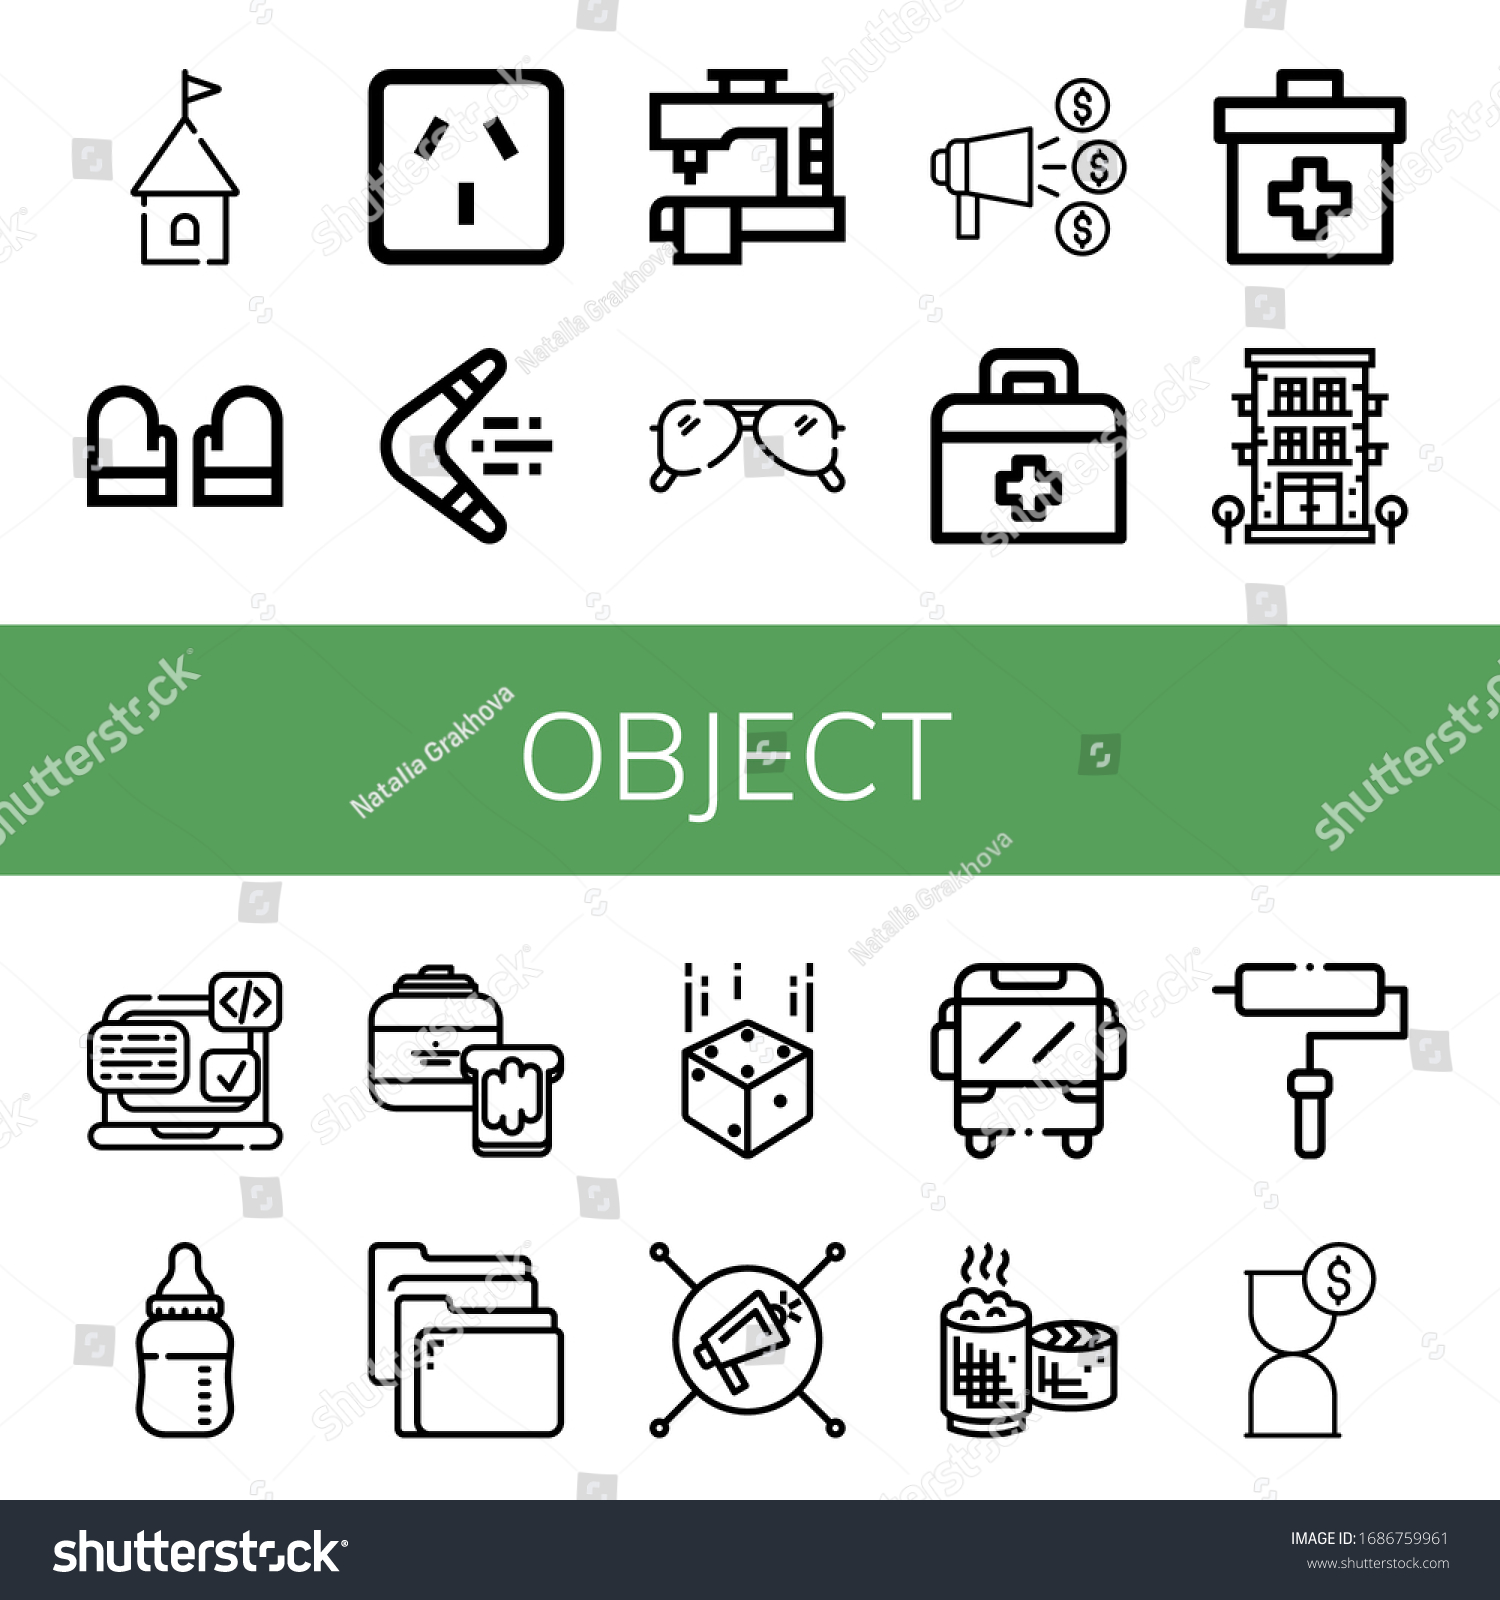 SVG of Set of object icons. Such as Tower, Gloves, Socket, Boomerang, Sewing machine, Sunglasses, Announce, First aid kit, Hotel, Svg, Baby bottle, Peanut butter, Folders , object icons svg